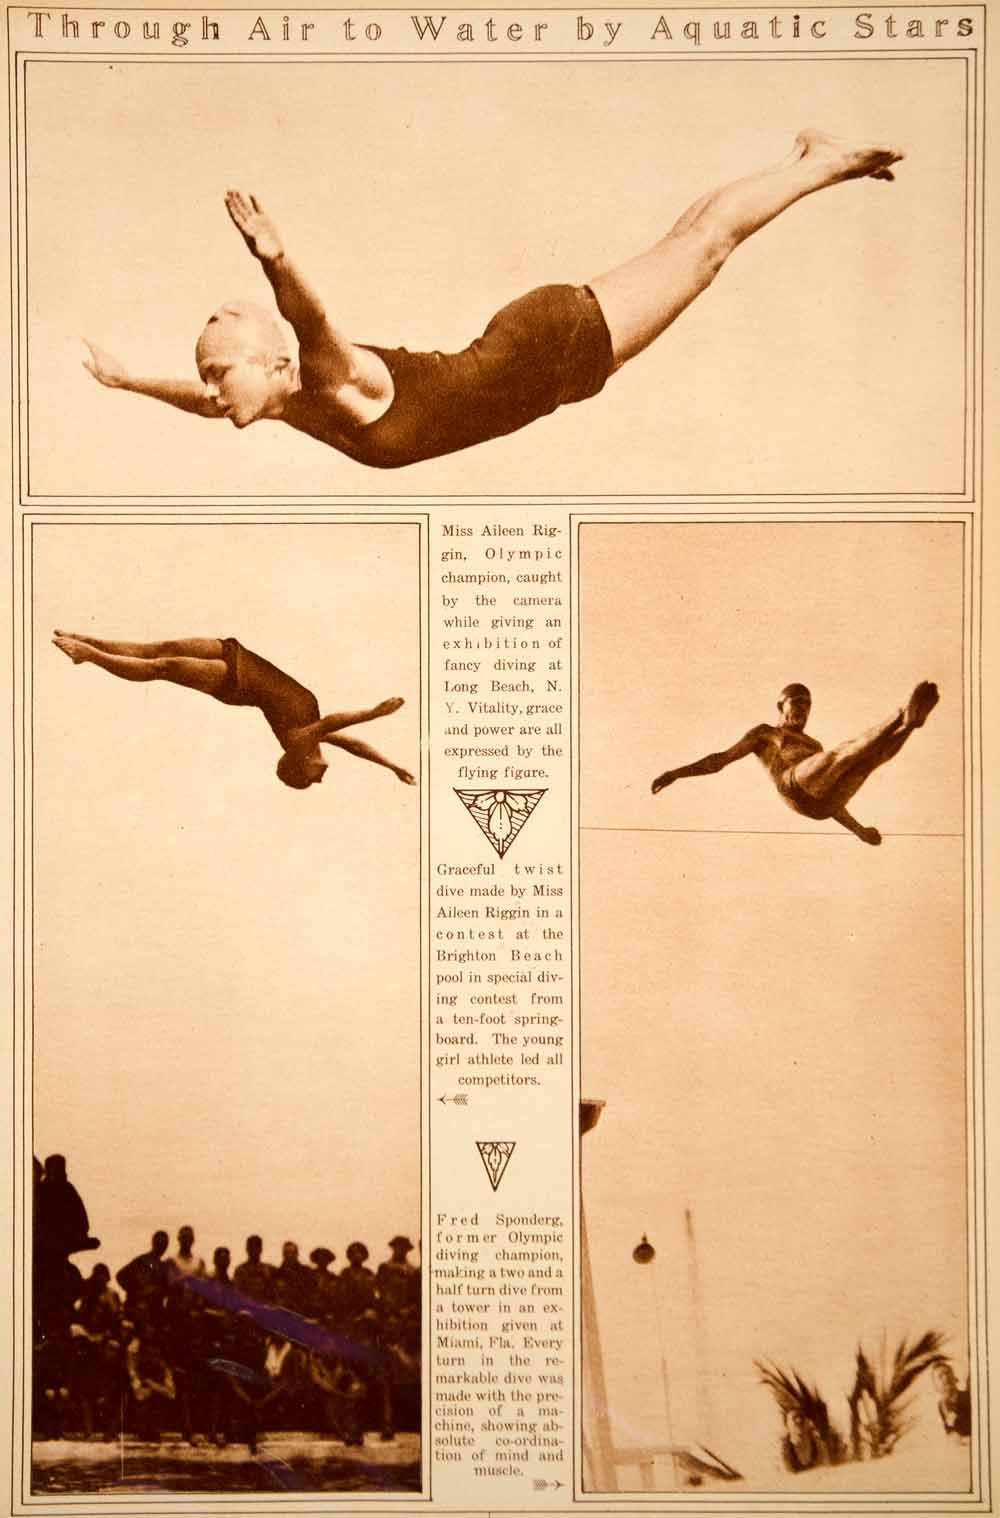 1923 Rotogravure Olympic Diving Aileen Riggin Fred Sponderg Champion Divers Dive